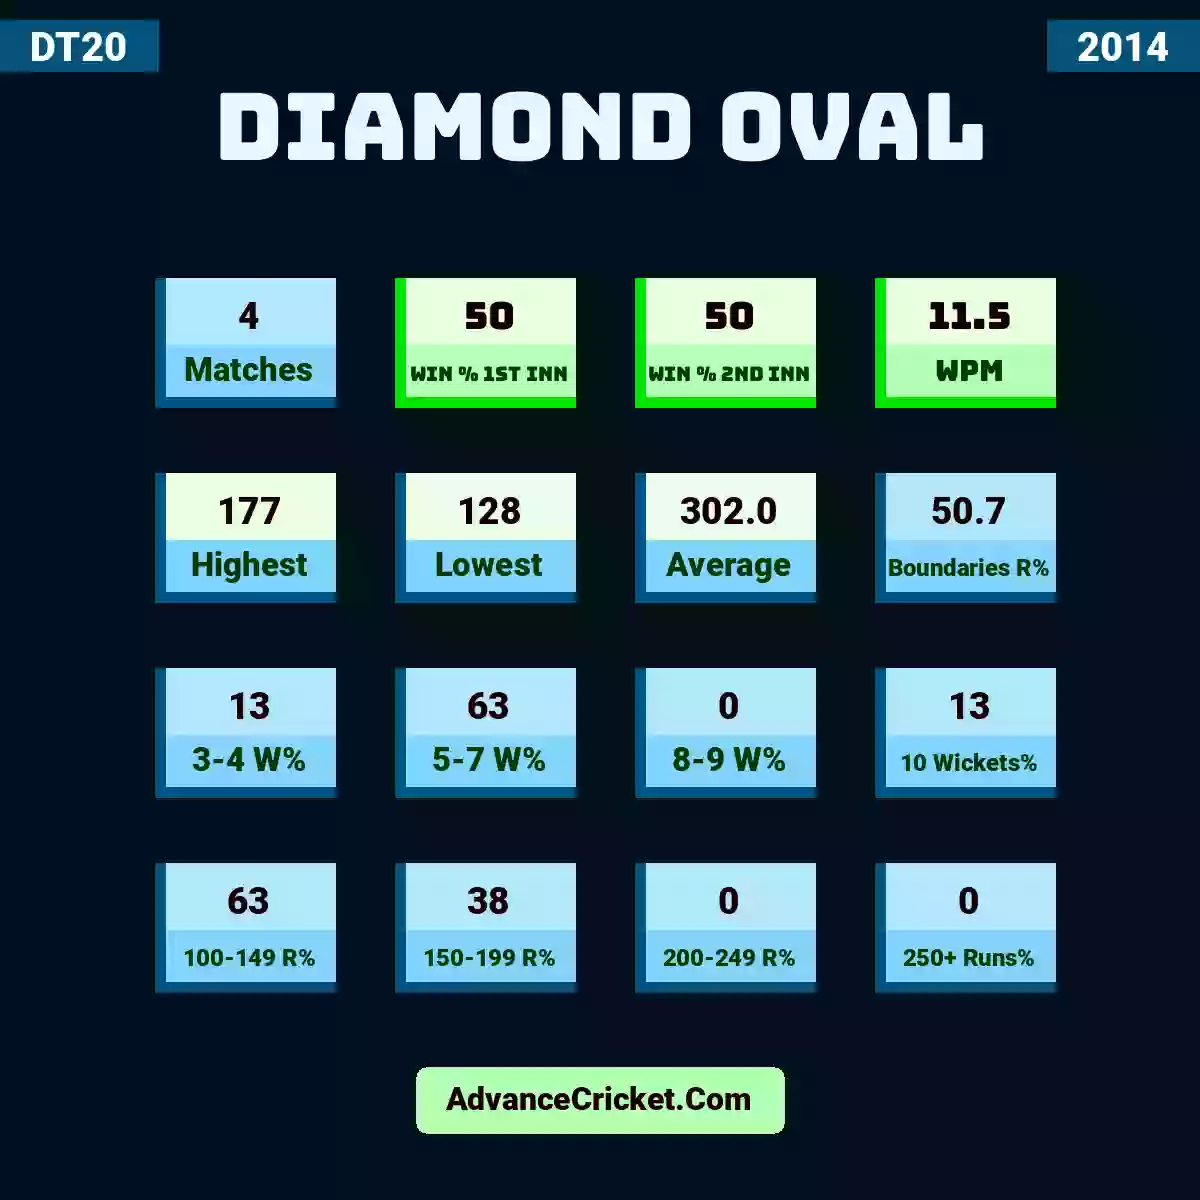 Image showing Diamond Oval with Matches: 4, Win % 1st Inn: 50, Win % 2nd Inn: 50, WPM: 11.5, Highest: 177, Lowest: 128, Average: 302.0, Boundaries R%: 50.7, 3-4 W%: 13, 5-7 W%: 63, 8-9 W%: 0, 10 Wickets%: 13, 100-149 R%: 63, 150-199 R%: 38, 200-249 R%: 0, 250+ Runs%: 0.